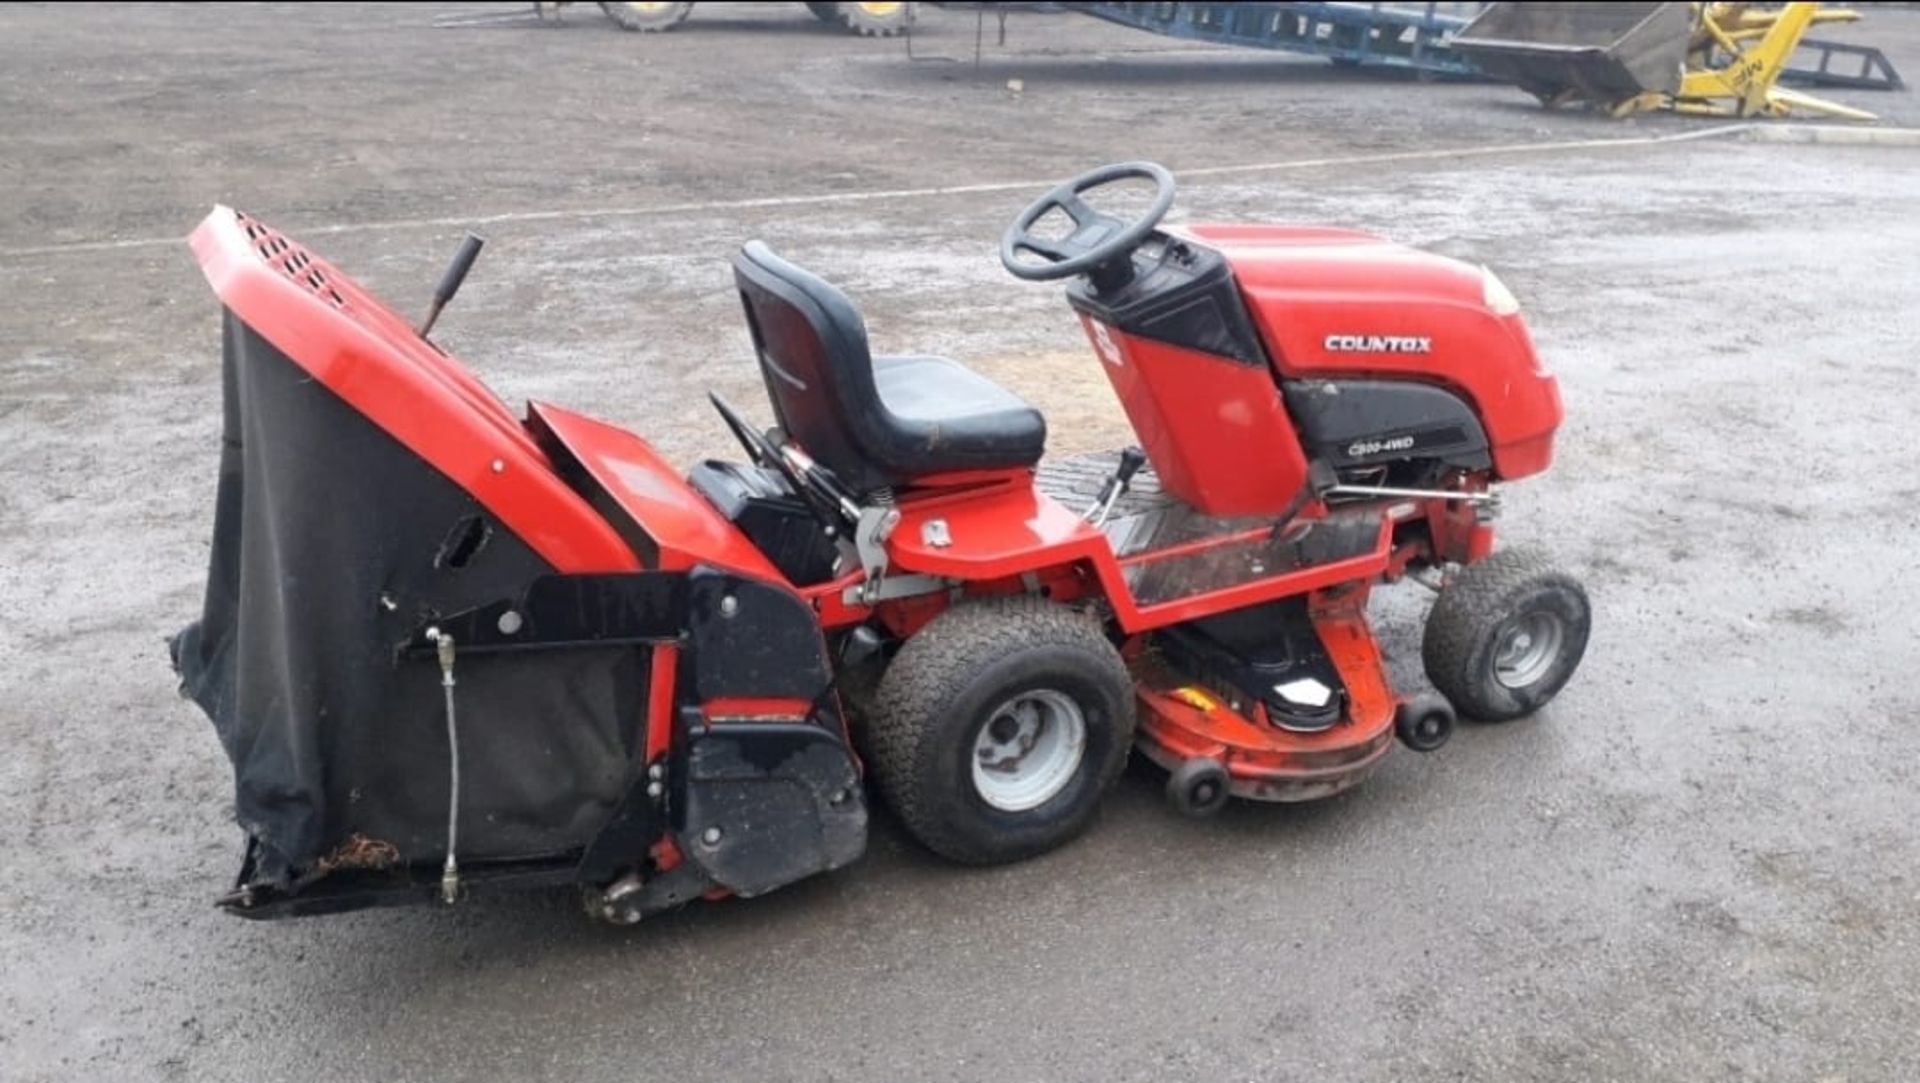 COUNTAX C800H PETROL RIDE ON MOWER, FULL WORKING ORDER WITH SWEEPER AND GRASS BOX *NO VAT* - Image 3 of 8